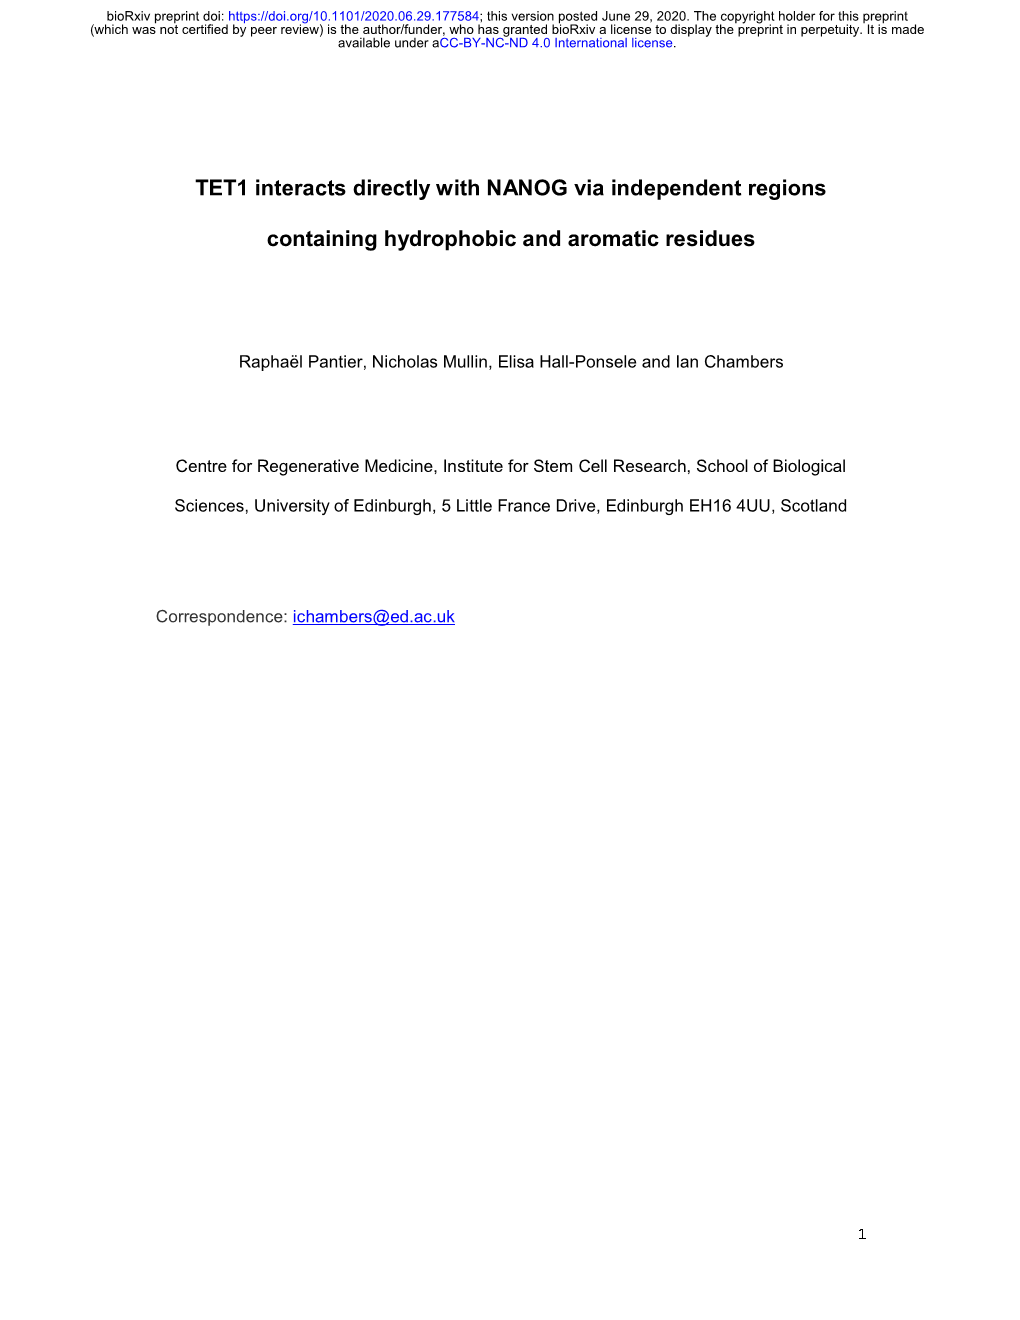 TET1 Interacts Directly with NANOG Via Independent Regions Containing